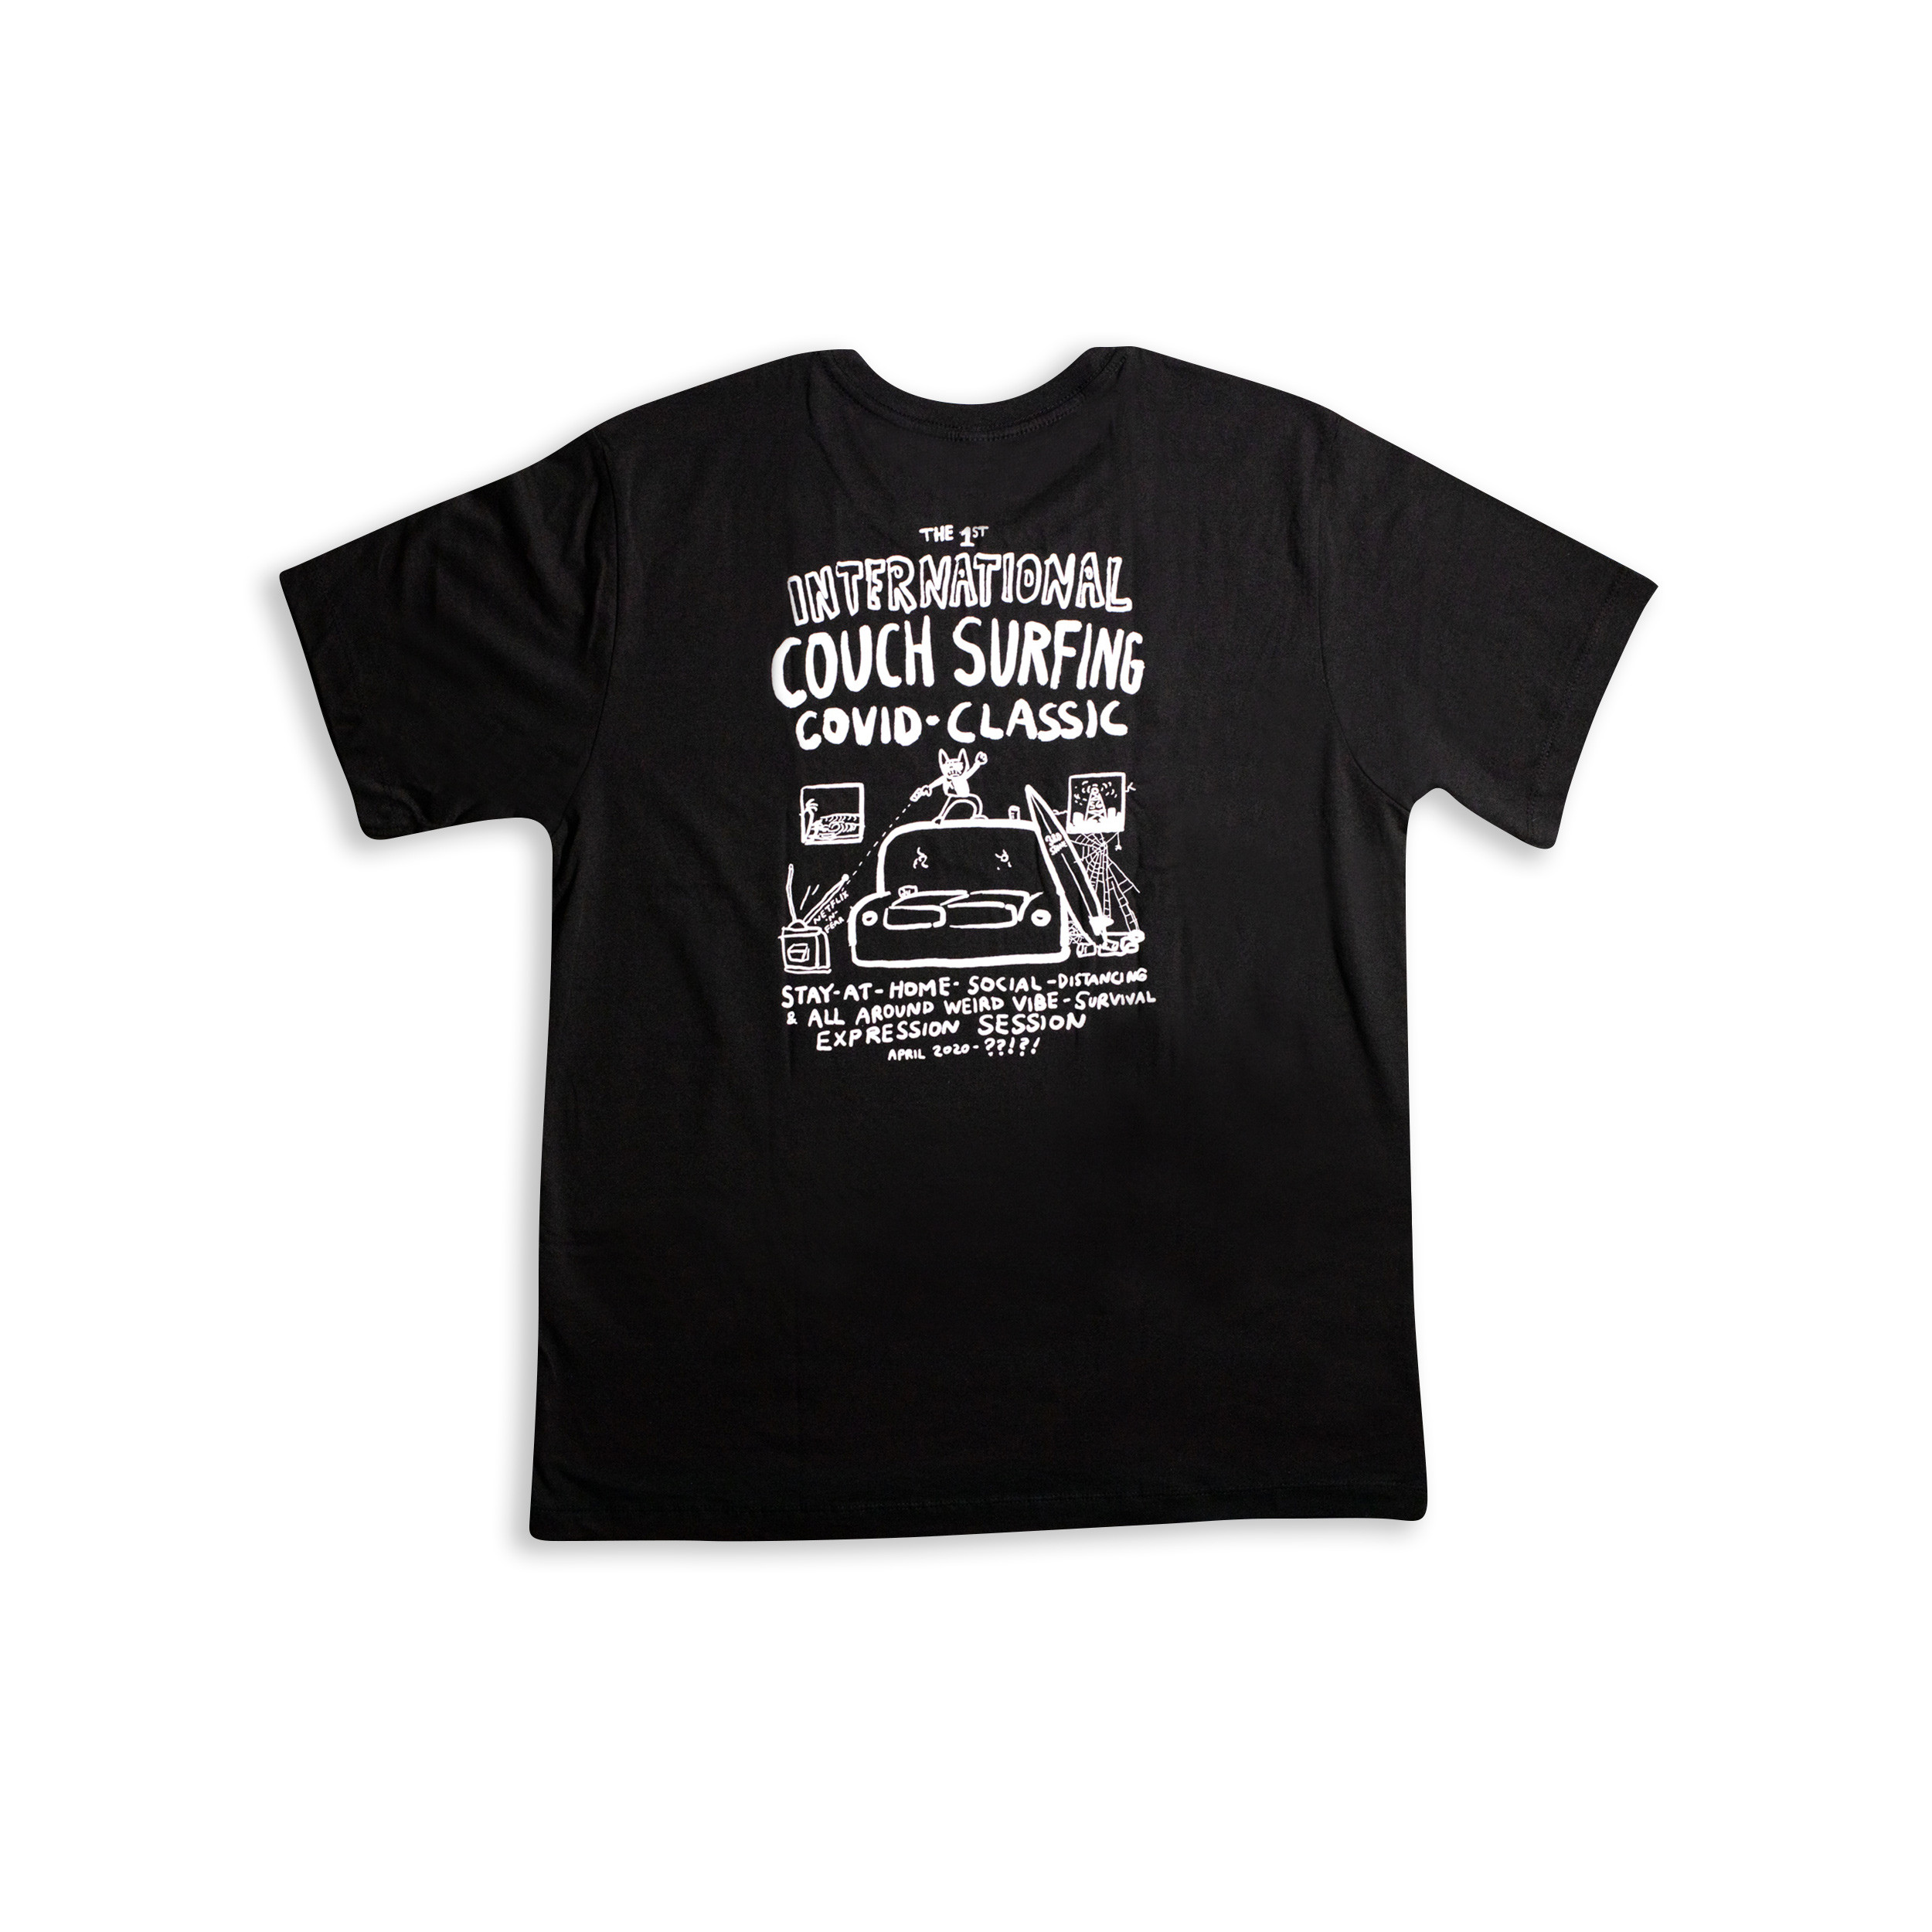 Pyzel Surfboards - Couch Surfing T- Shirt Black